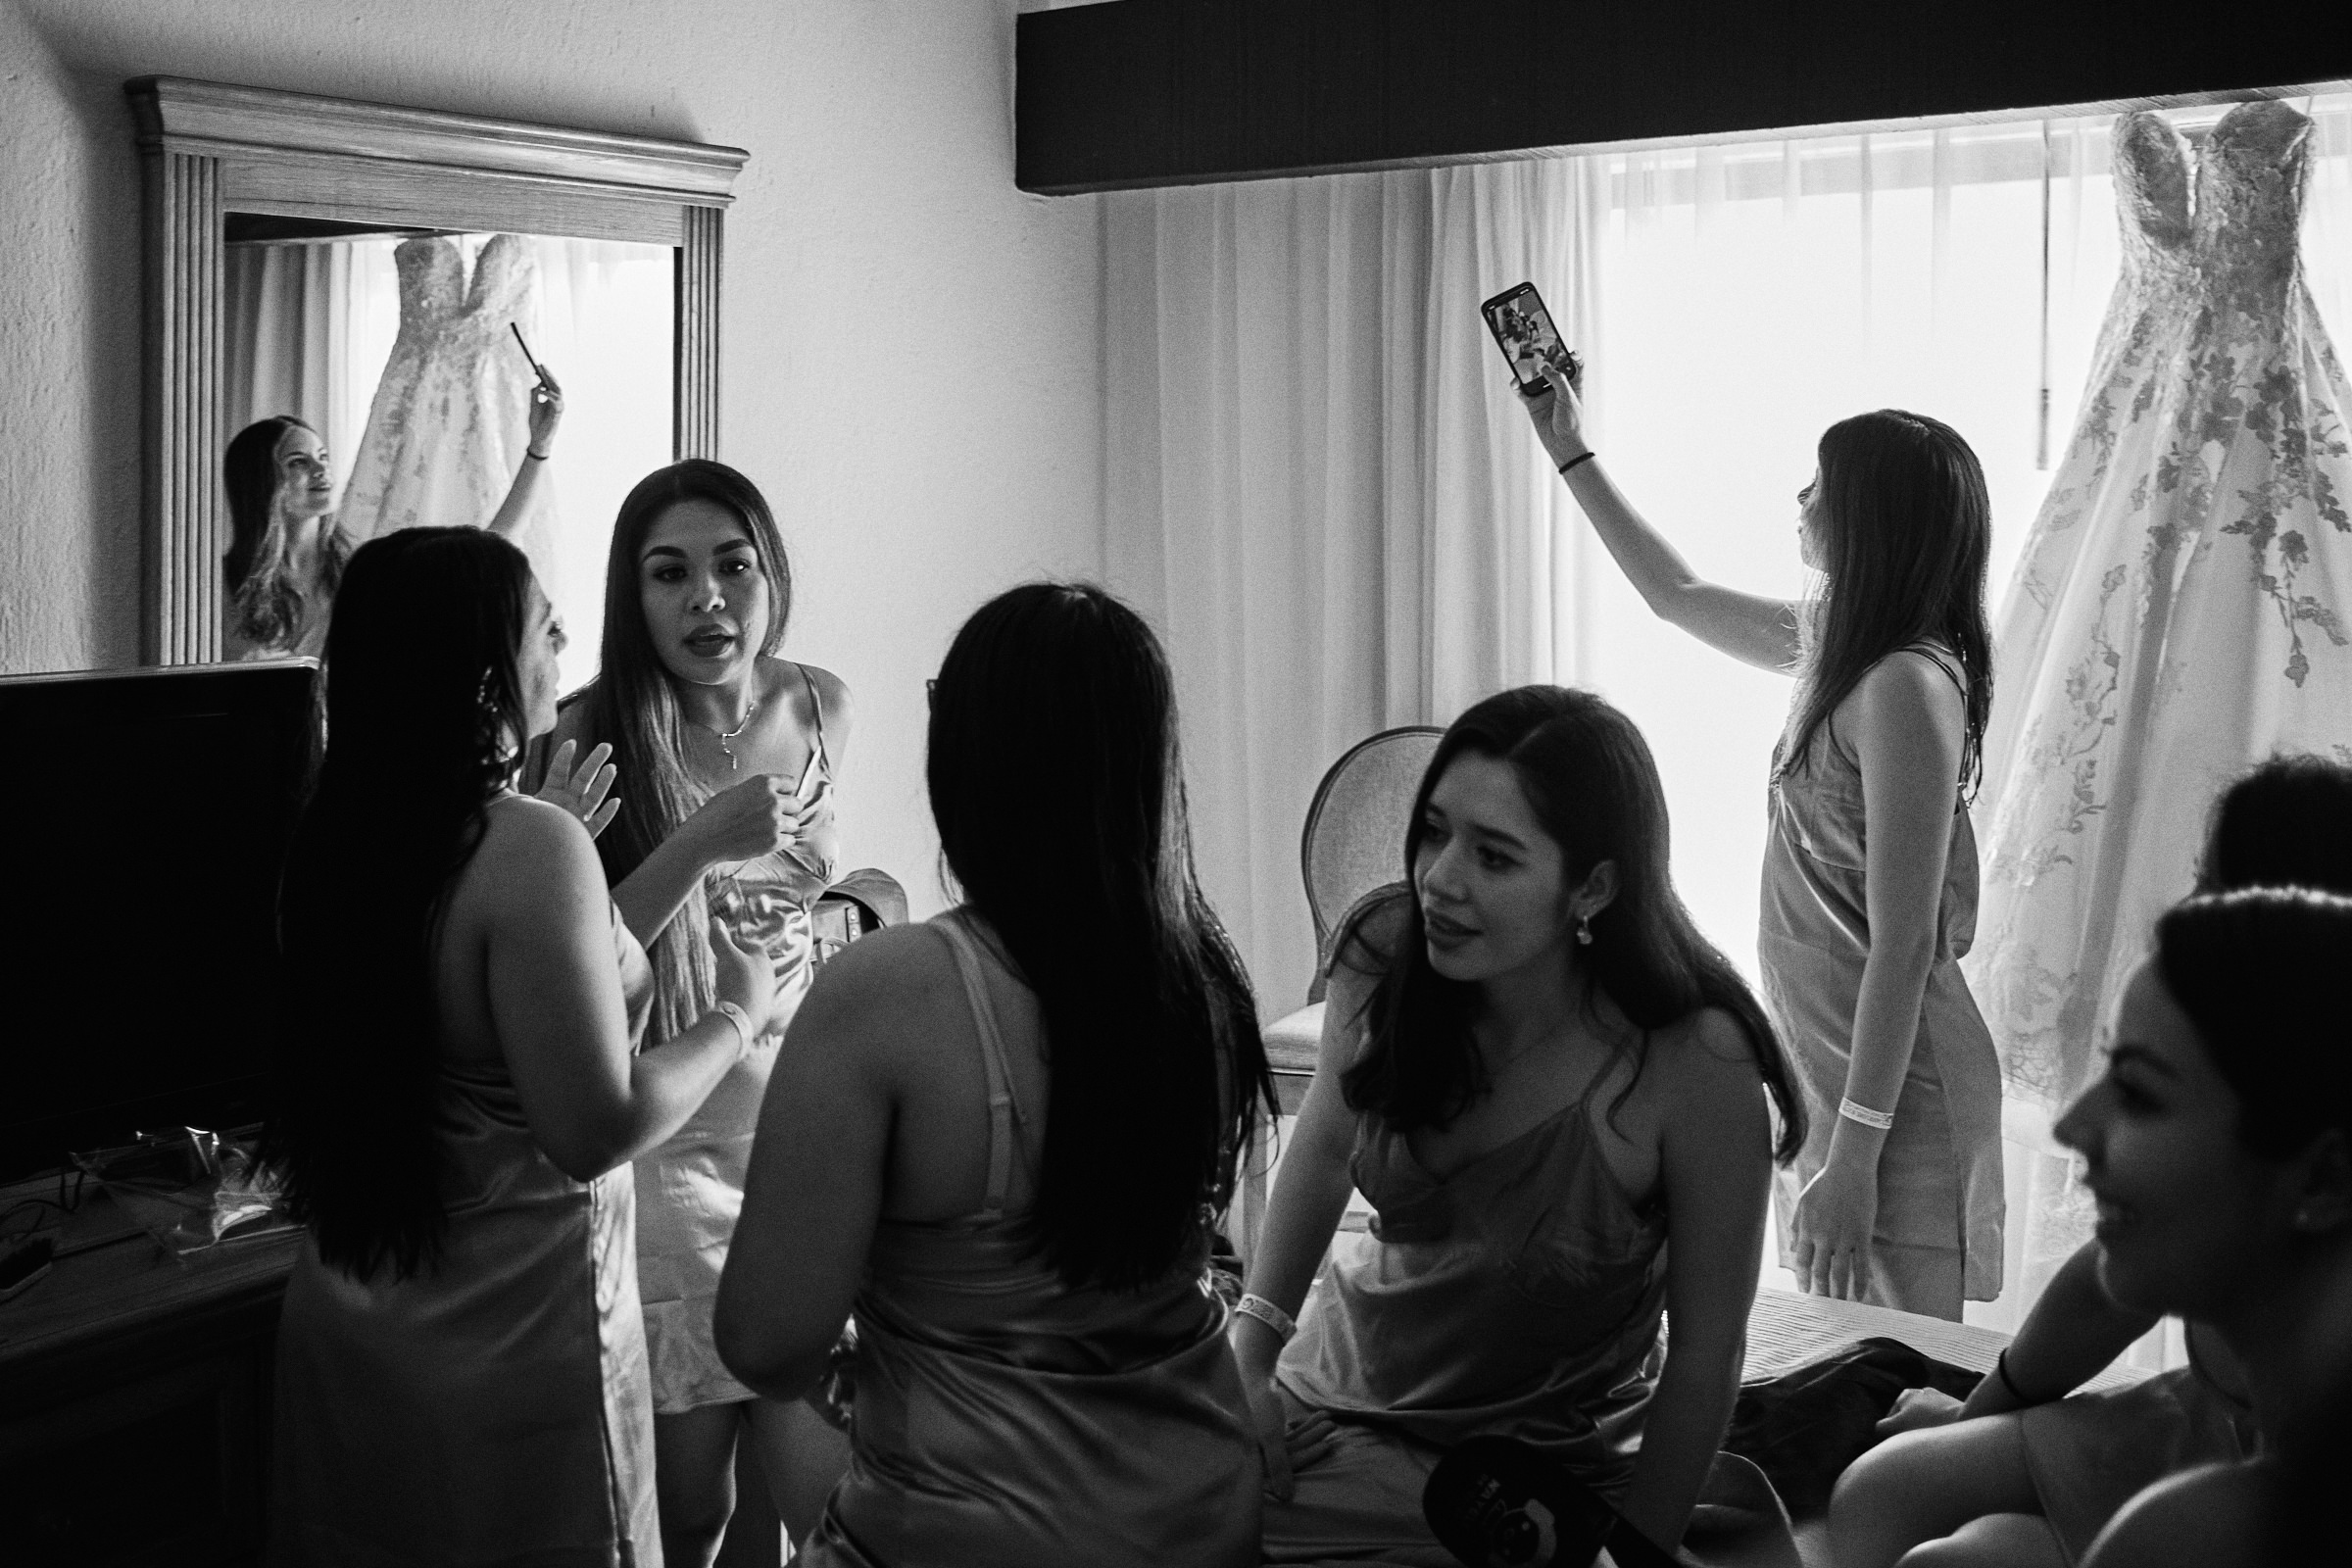 Bridesmaids Hang Out Around The Wedding Gown Morning Of The Wedding In Mexico